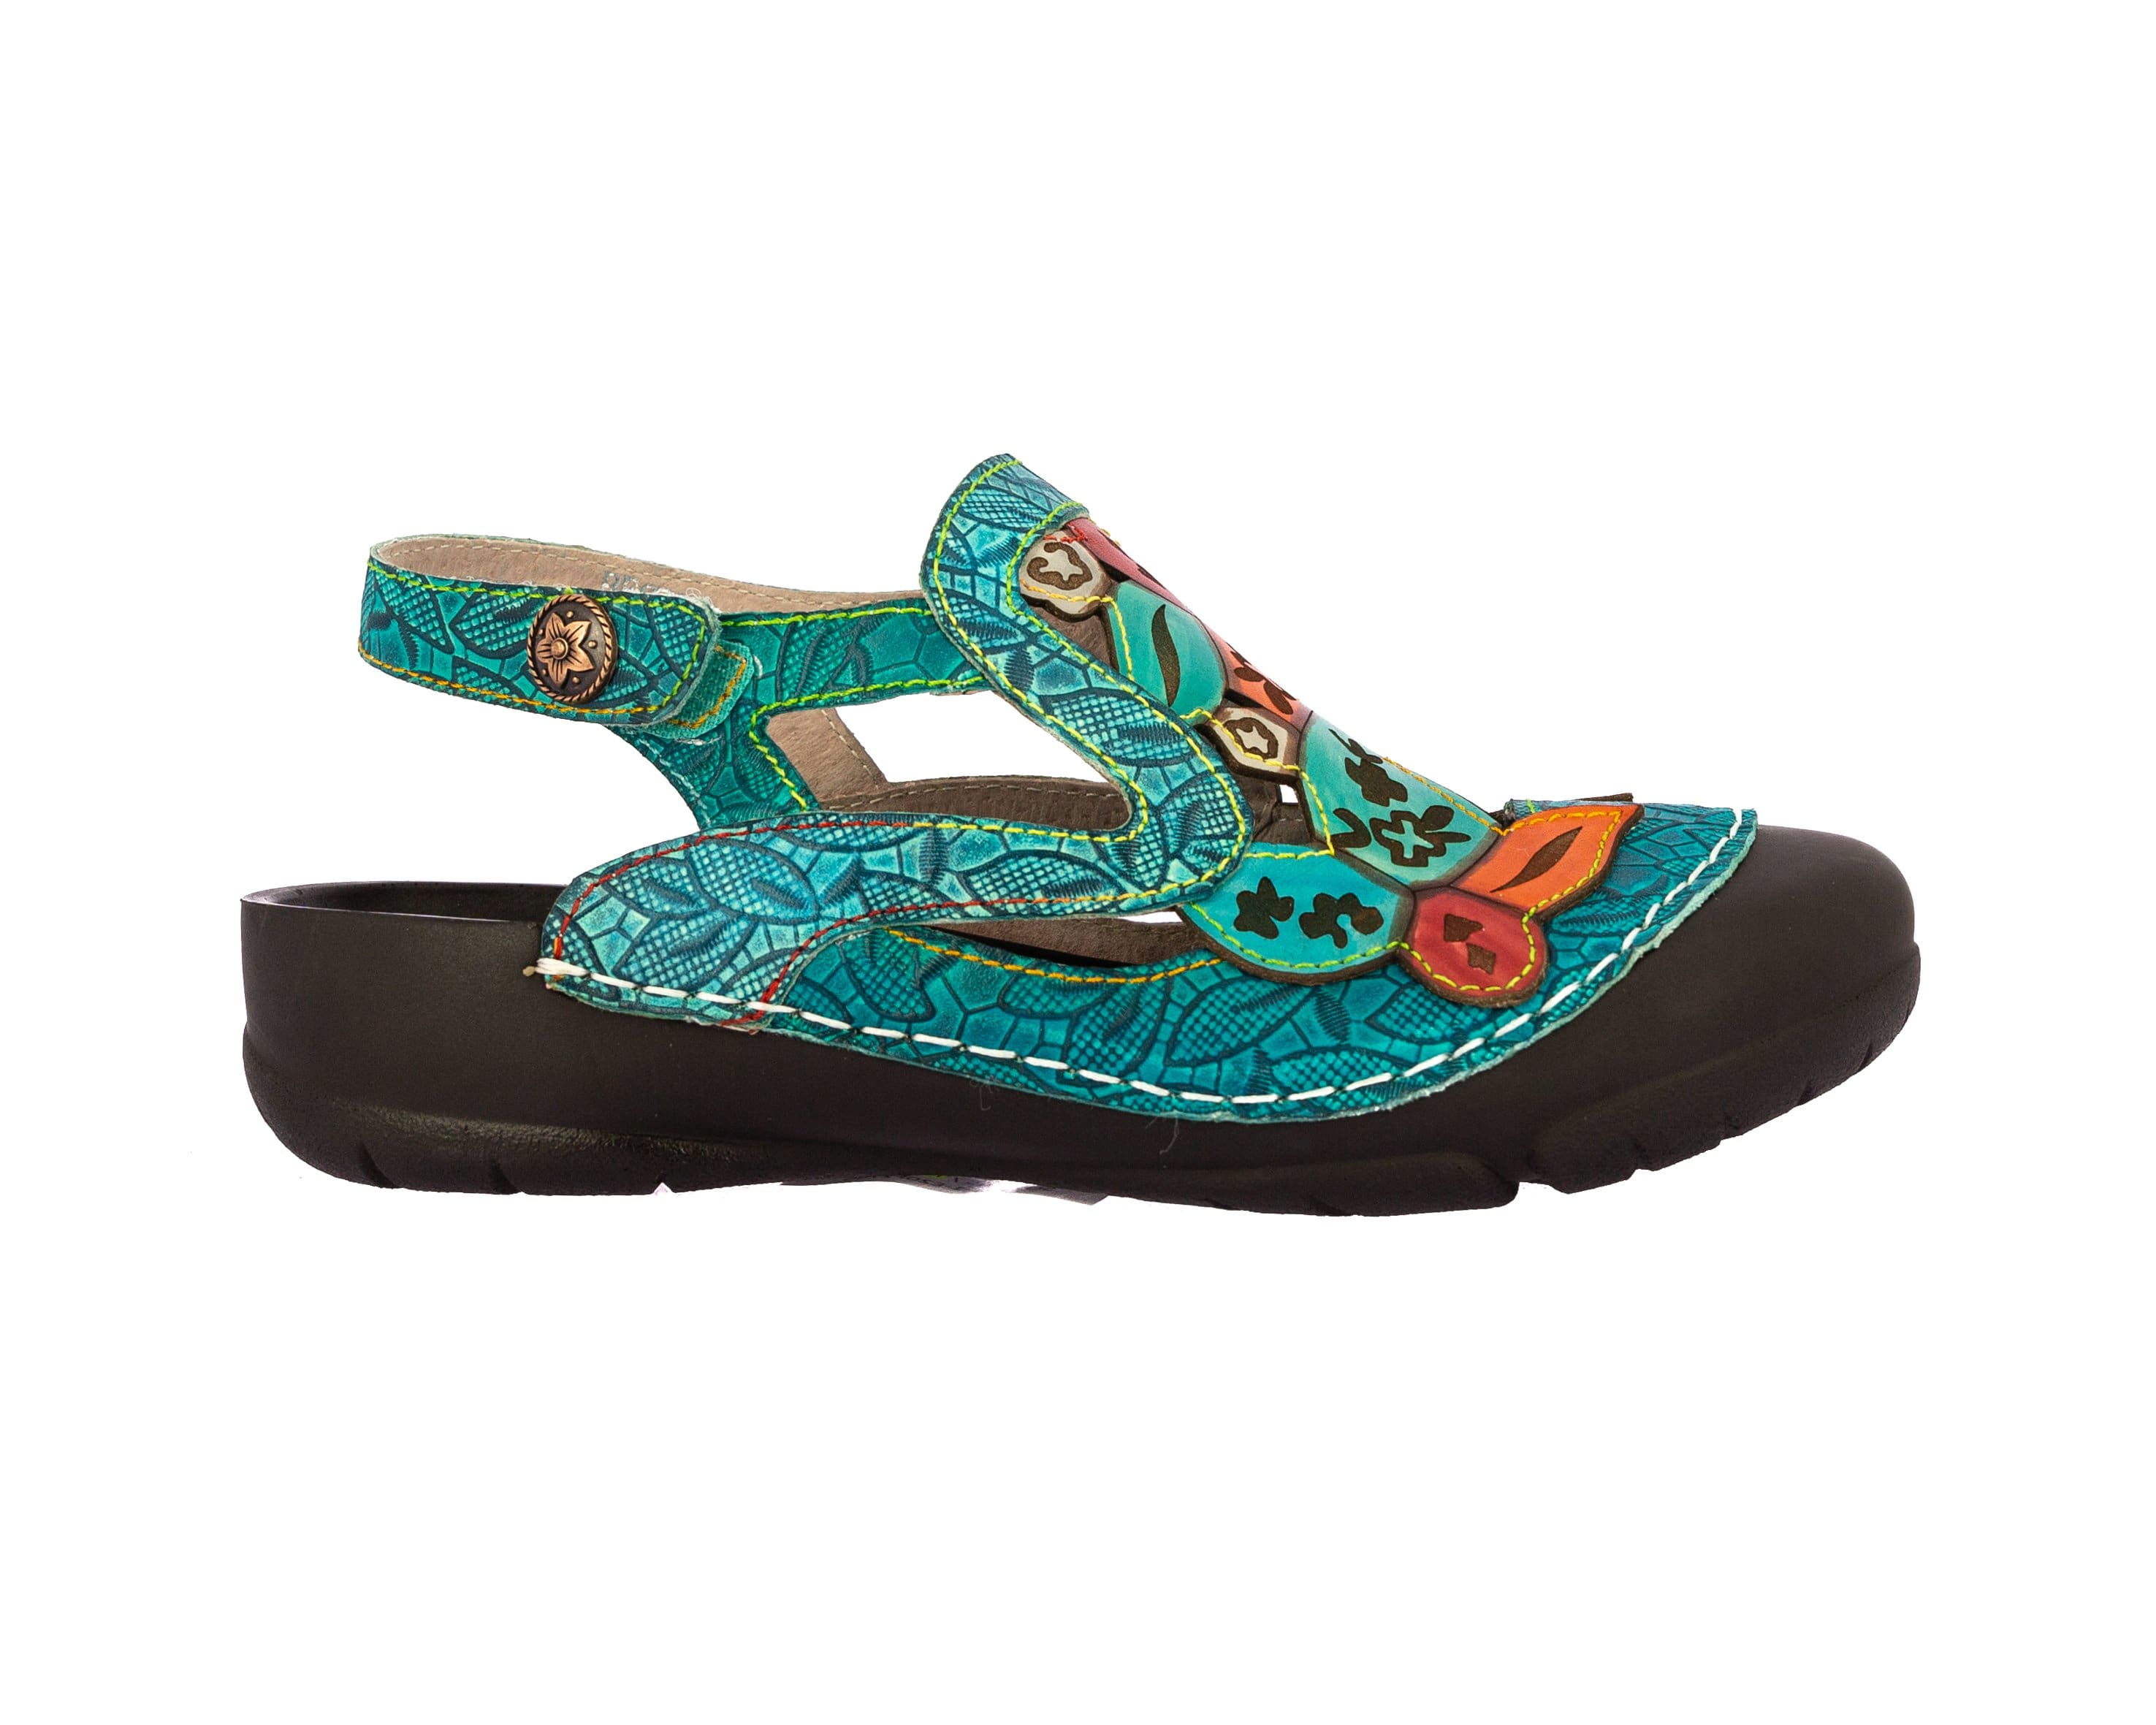 Chaussures BECZIERSO 01 - 35 / TURQUOISE - Sandale